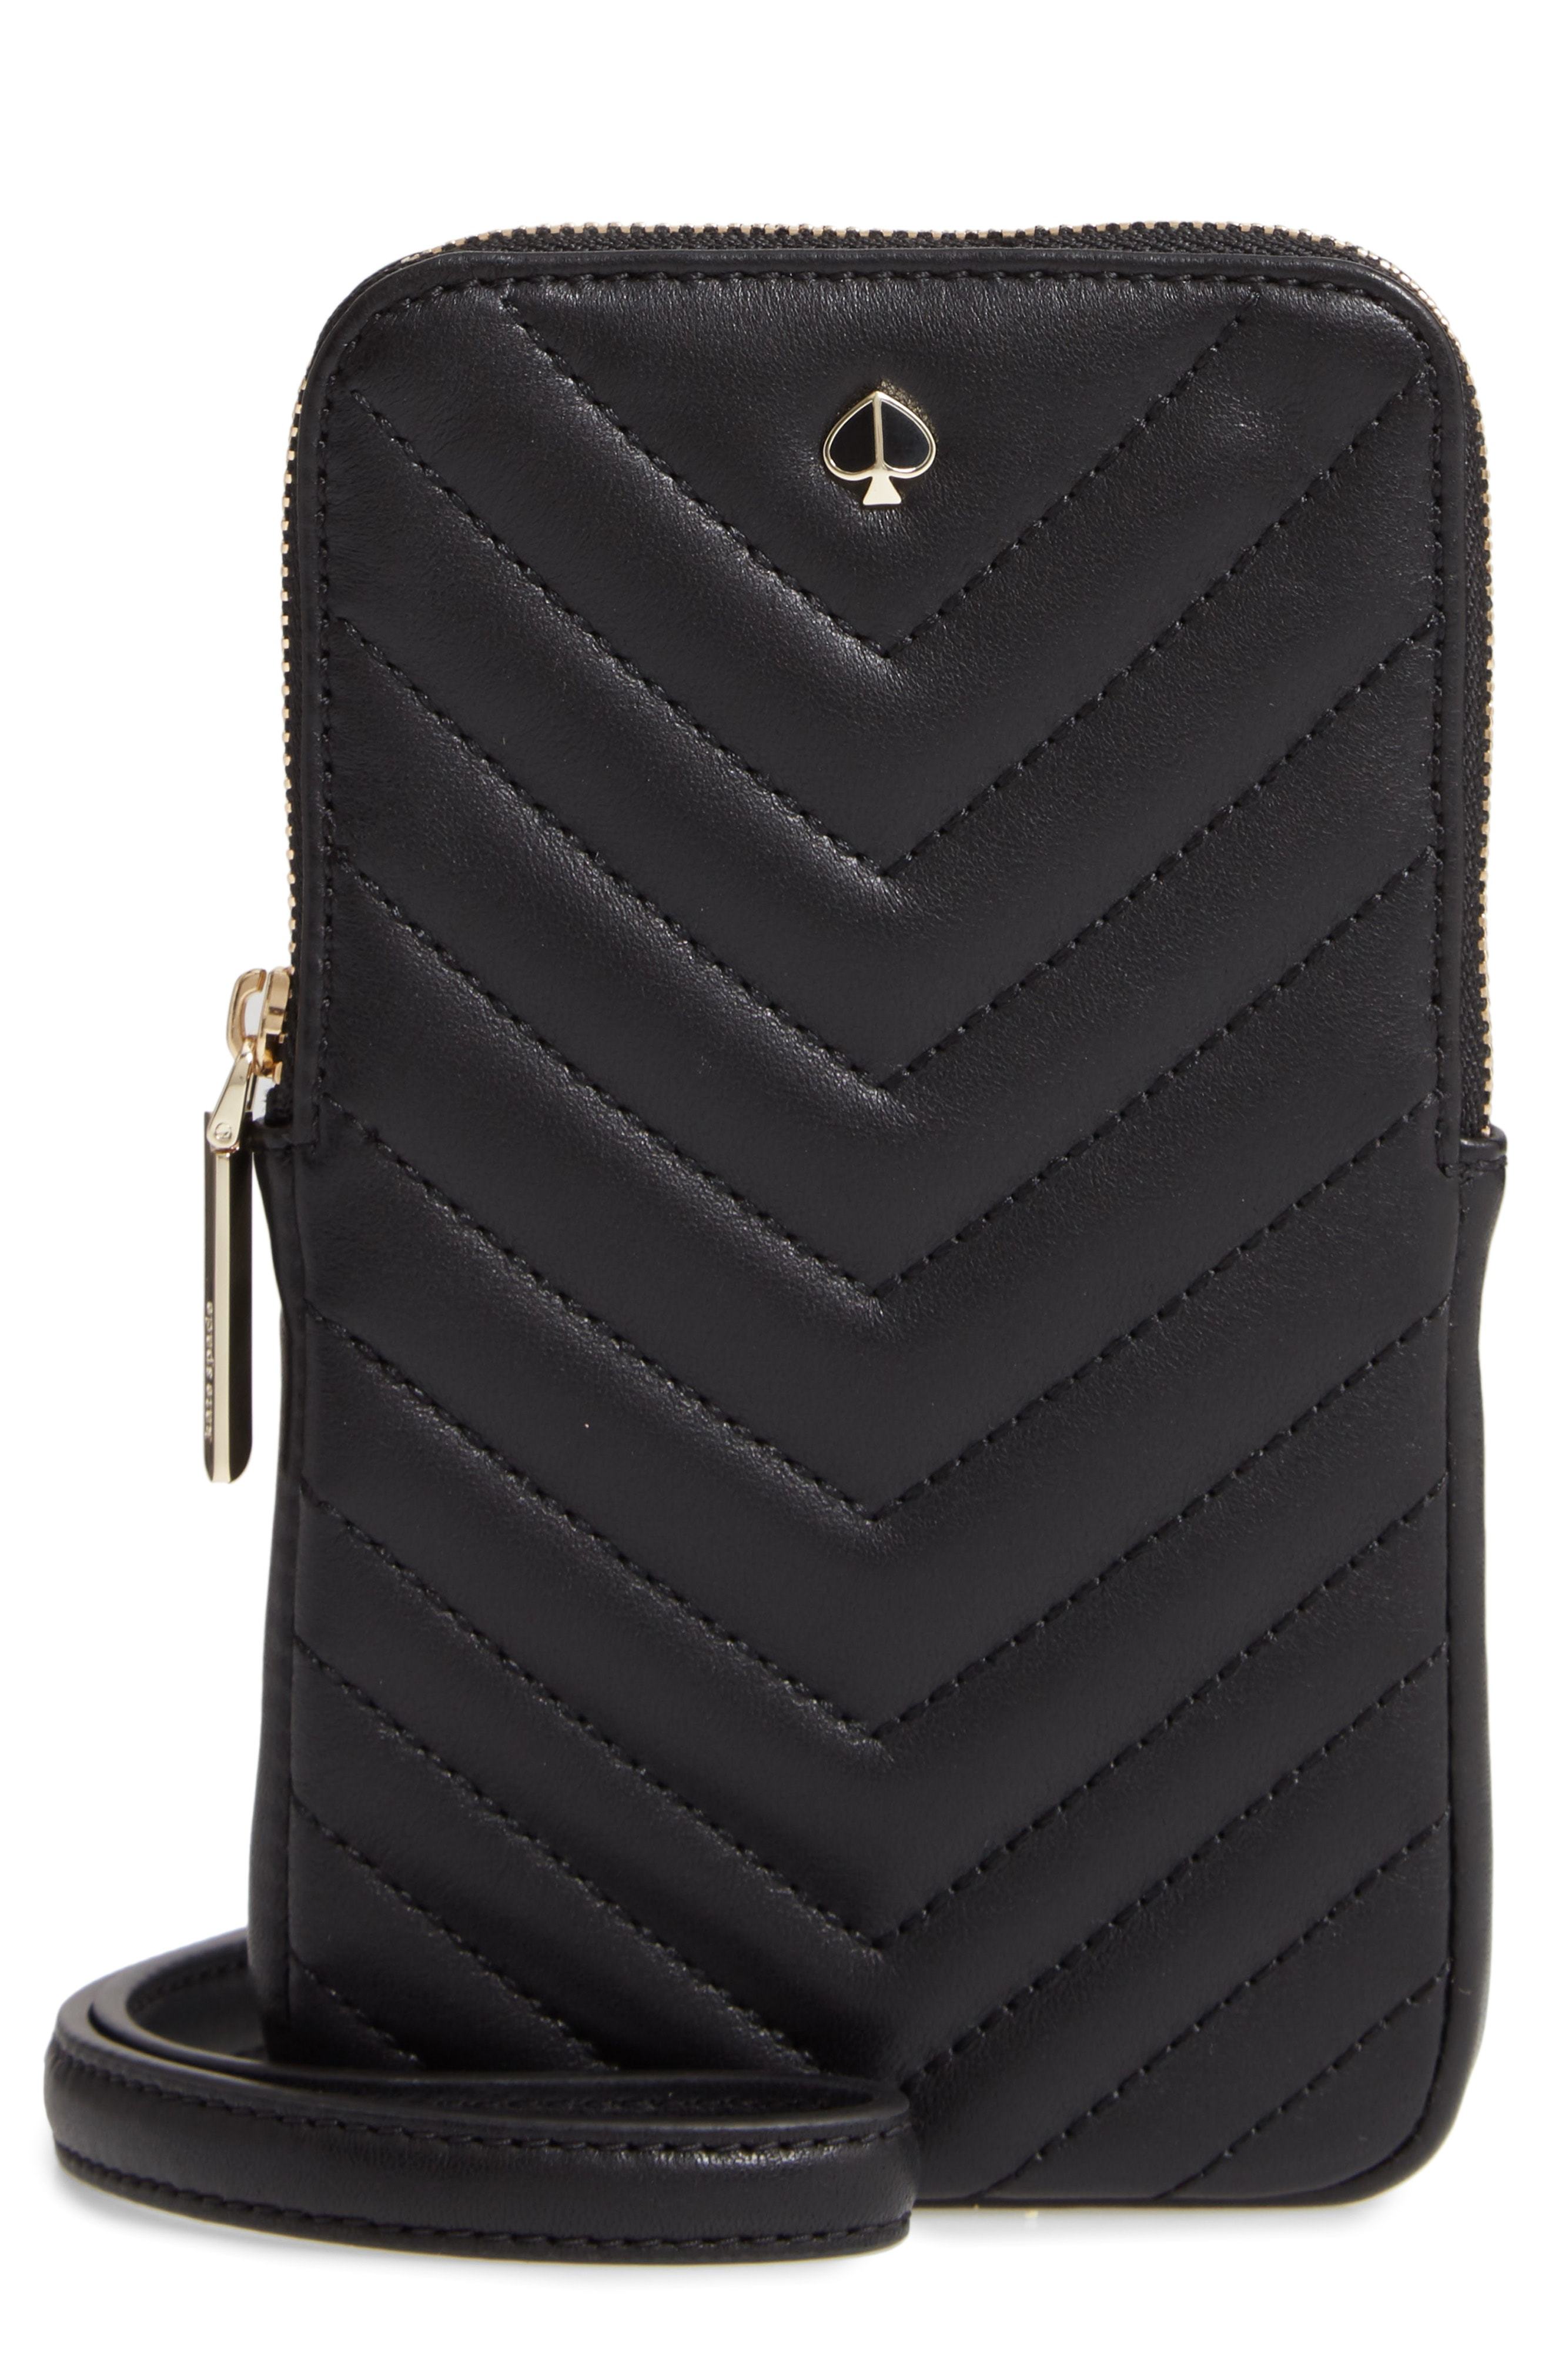 kate spade new york Amelia Quilted Leather Phone Crossbody Bag, $148 |  Nordstrom | Lookastic